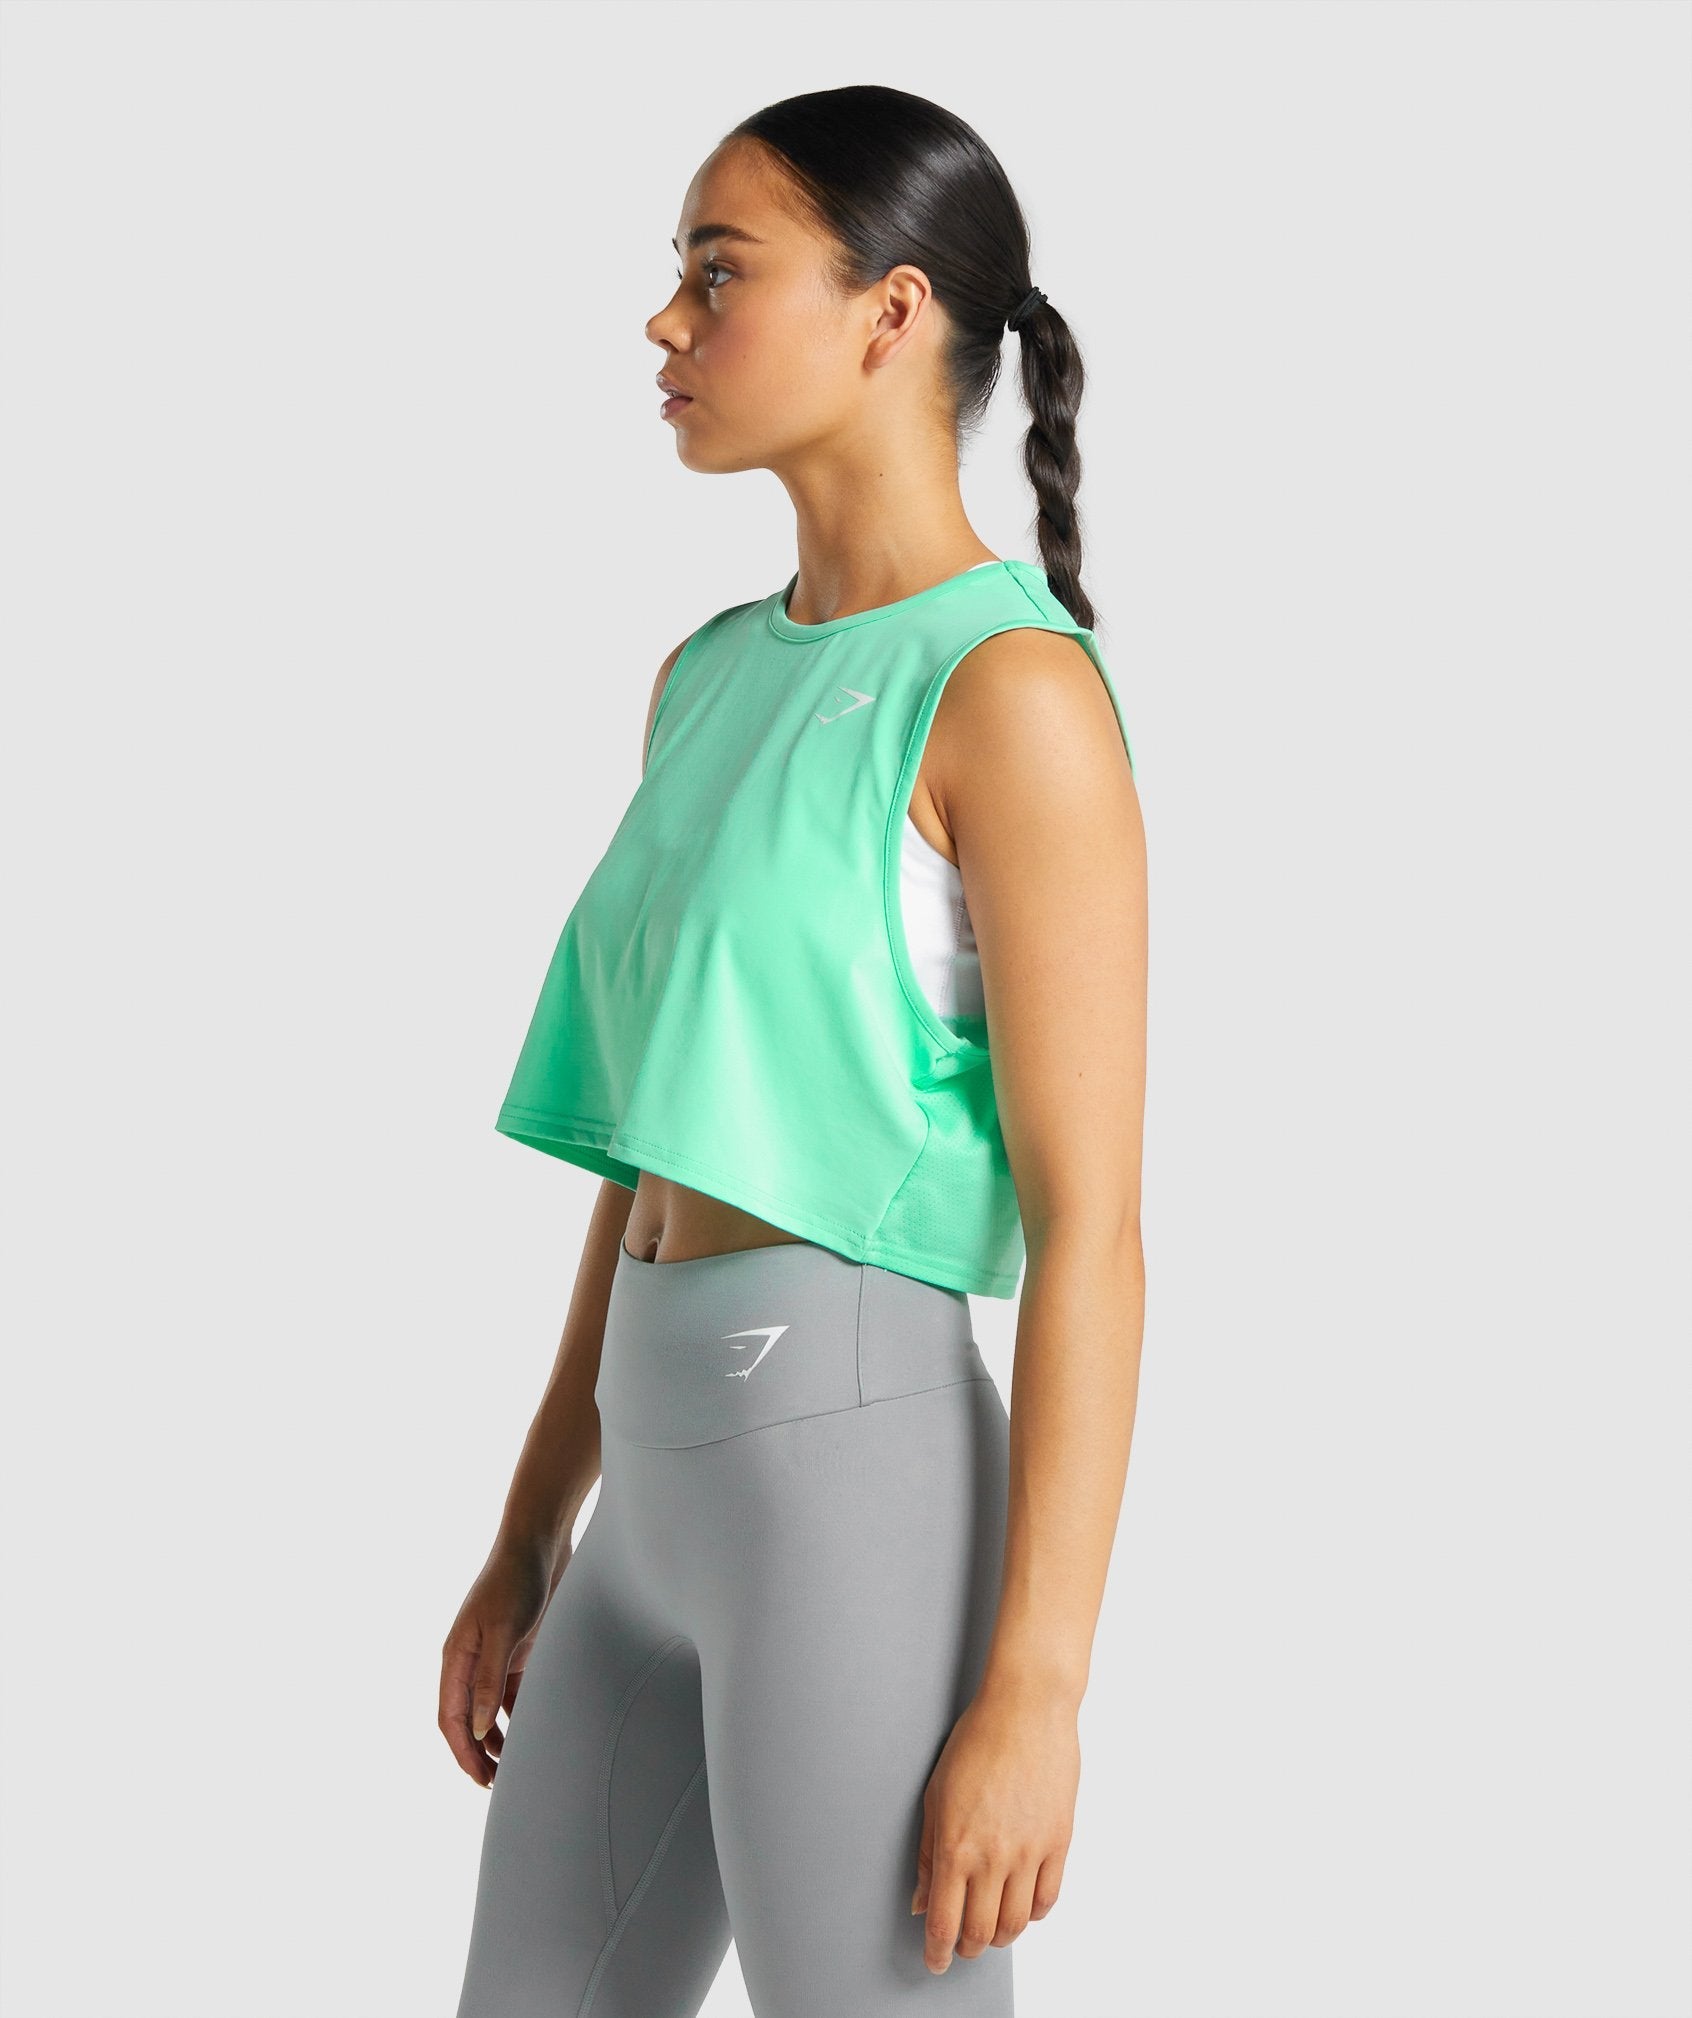 Training Crop Tank in Turquoise